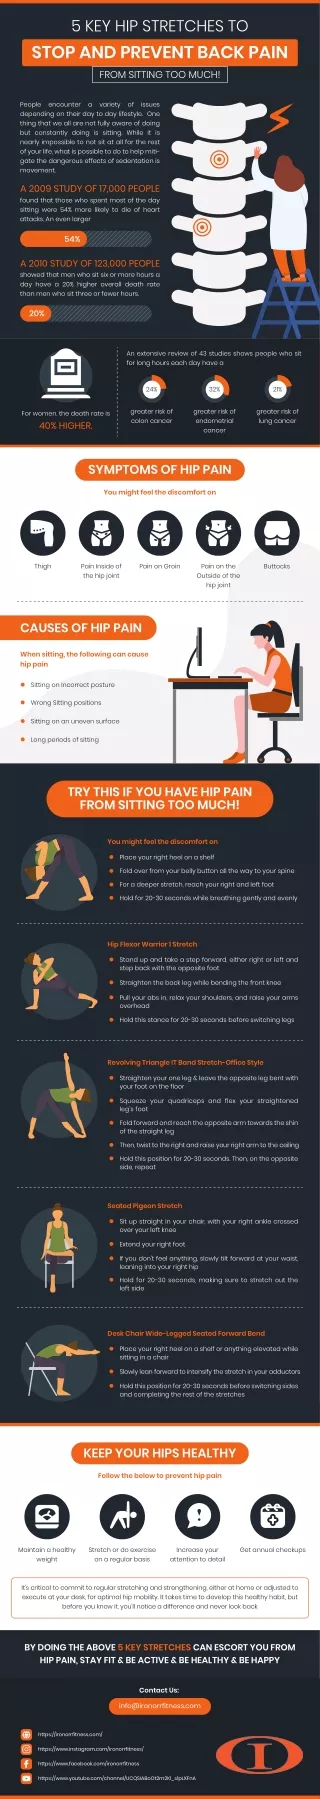 5 Key Hip Stretches to Stop and Prevent Back Pain from Sitting Too Much!